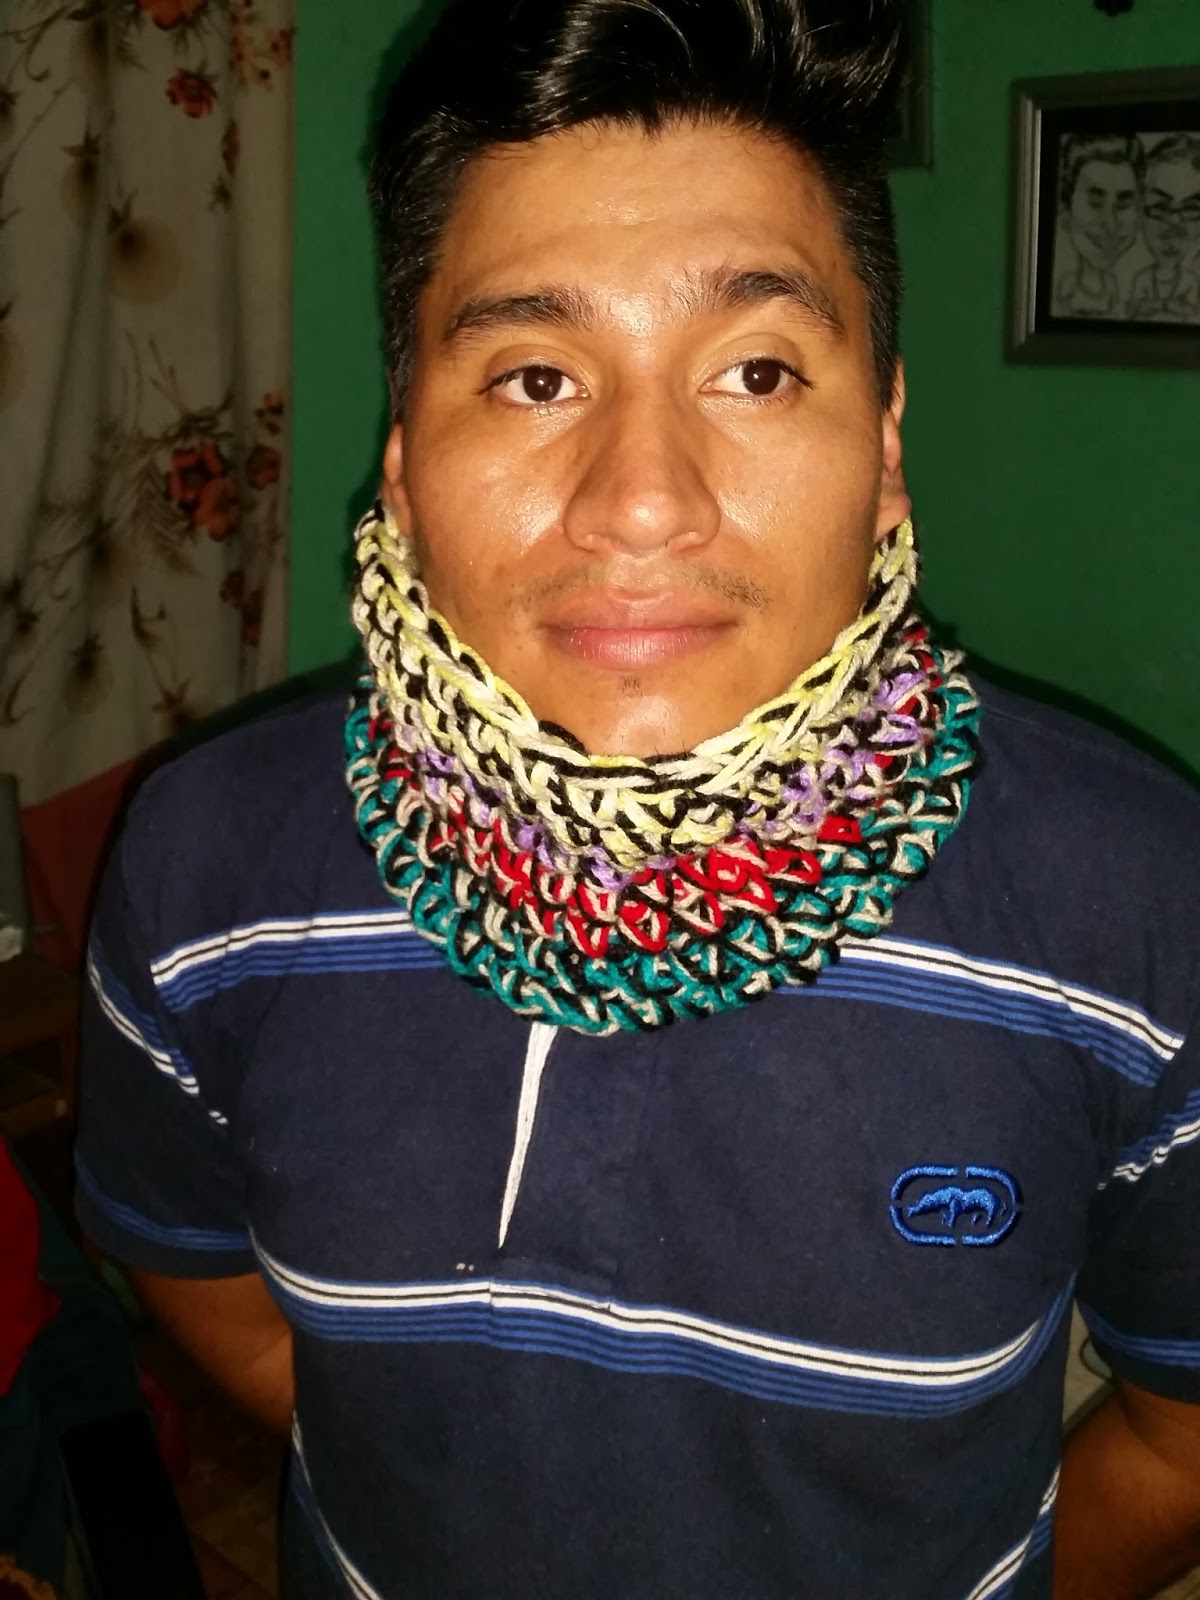 Loom Knitted Neck Scarf